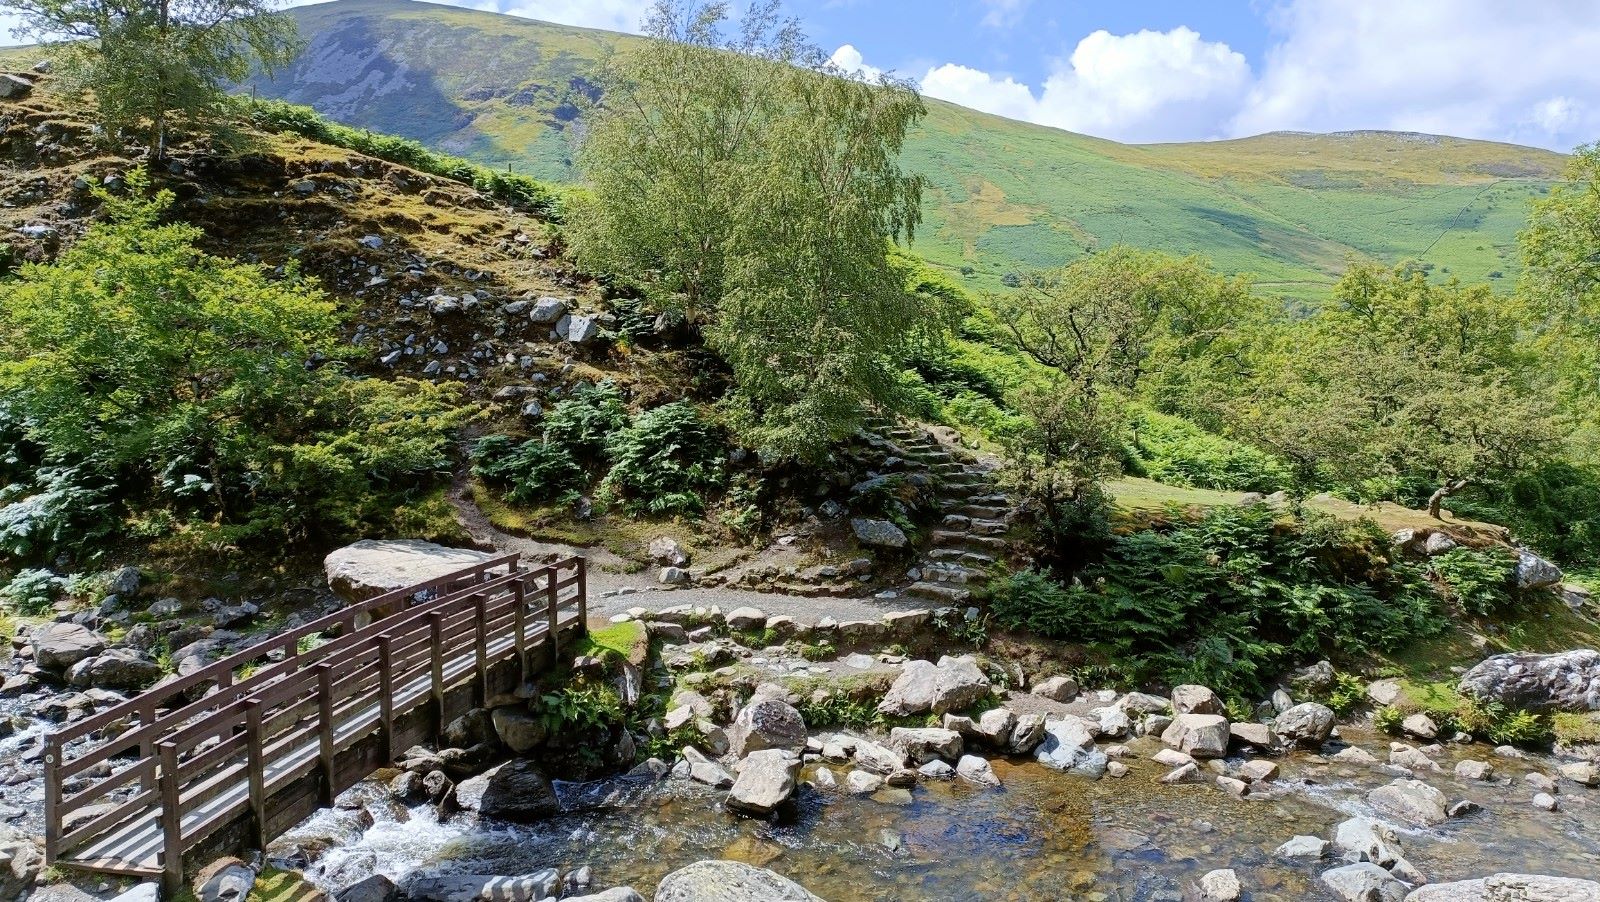 What's near Trefor to visit for day, Aber Falls Eryri Snowdonia National park